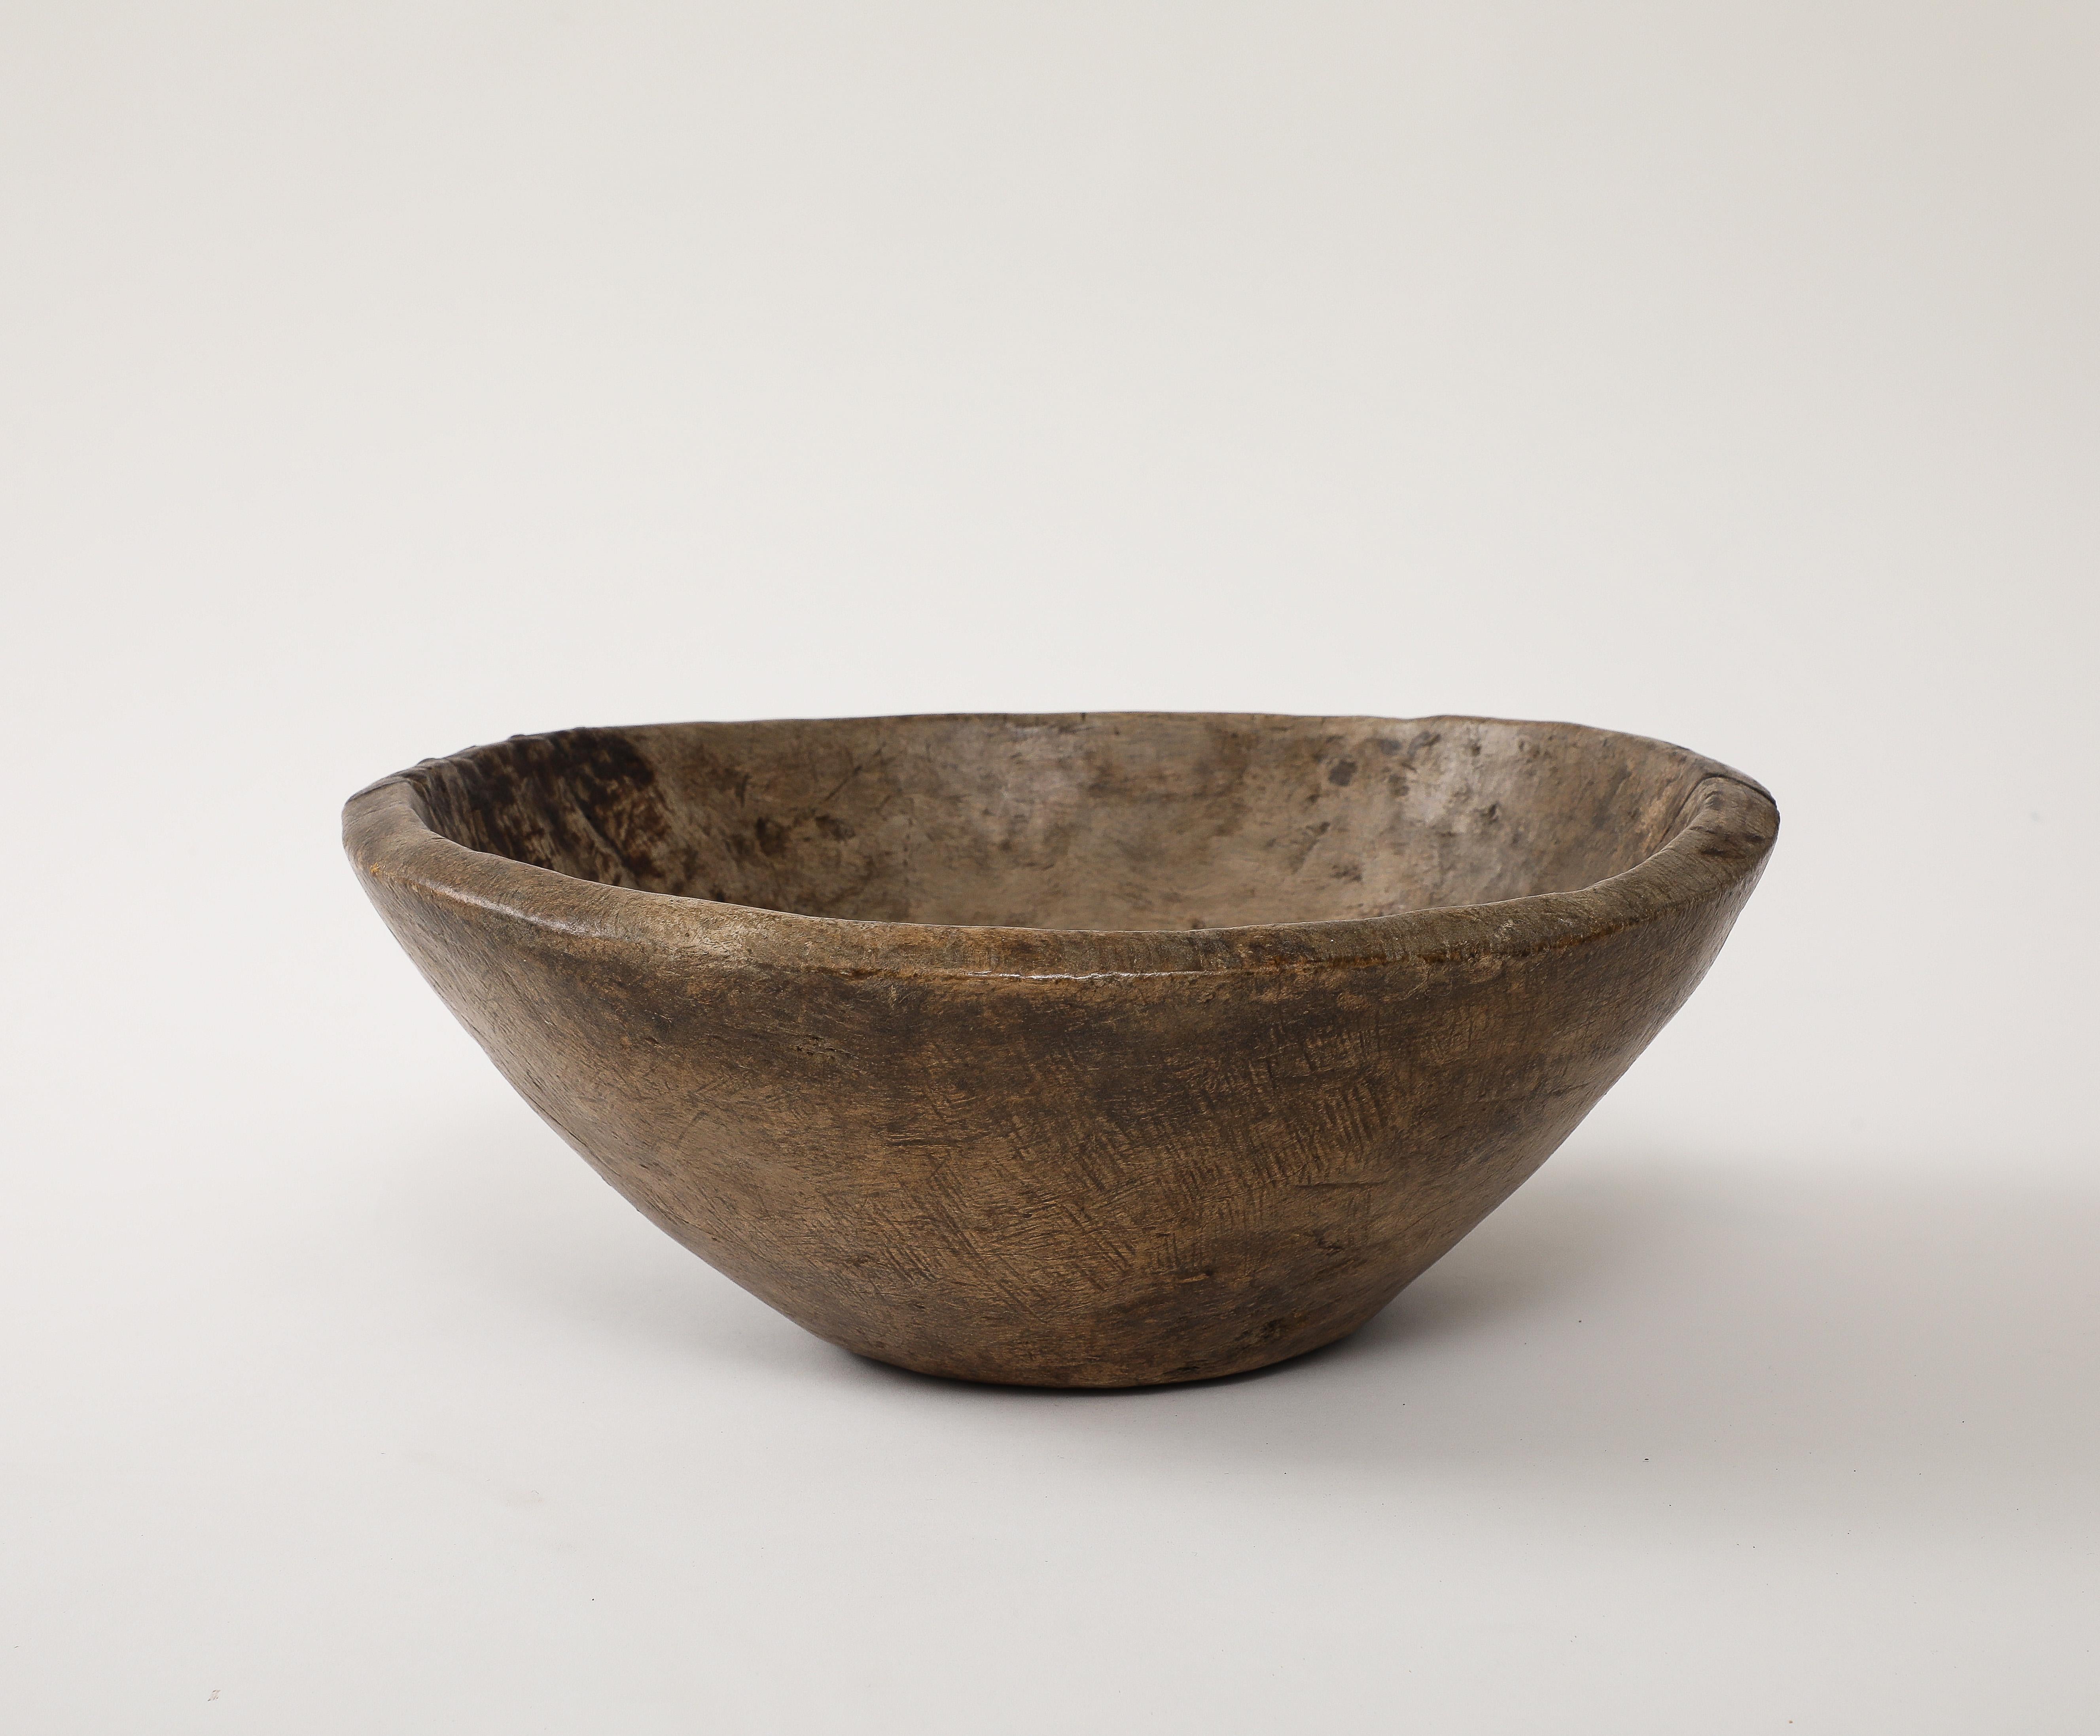 Made from Walnut, and it is large and deep make this a very special bowl